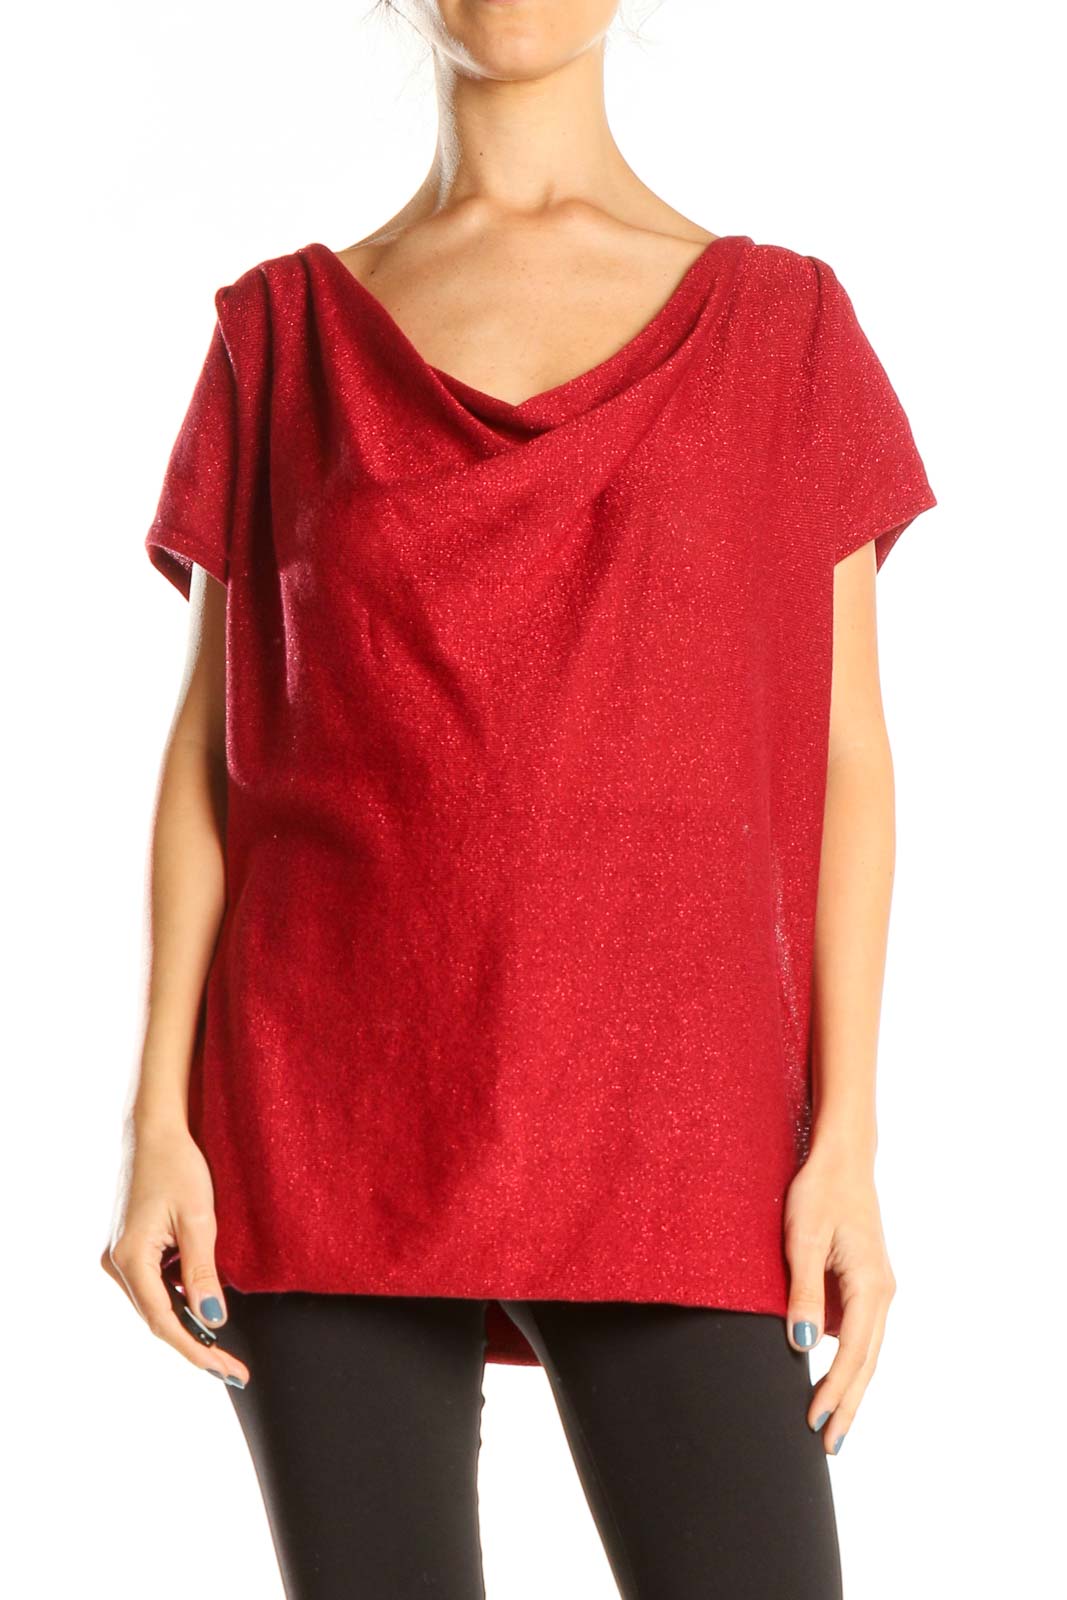 Red Shimmer Cowl Neck Chic Blouse Front